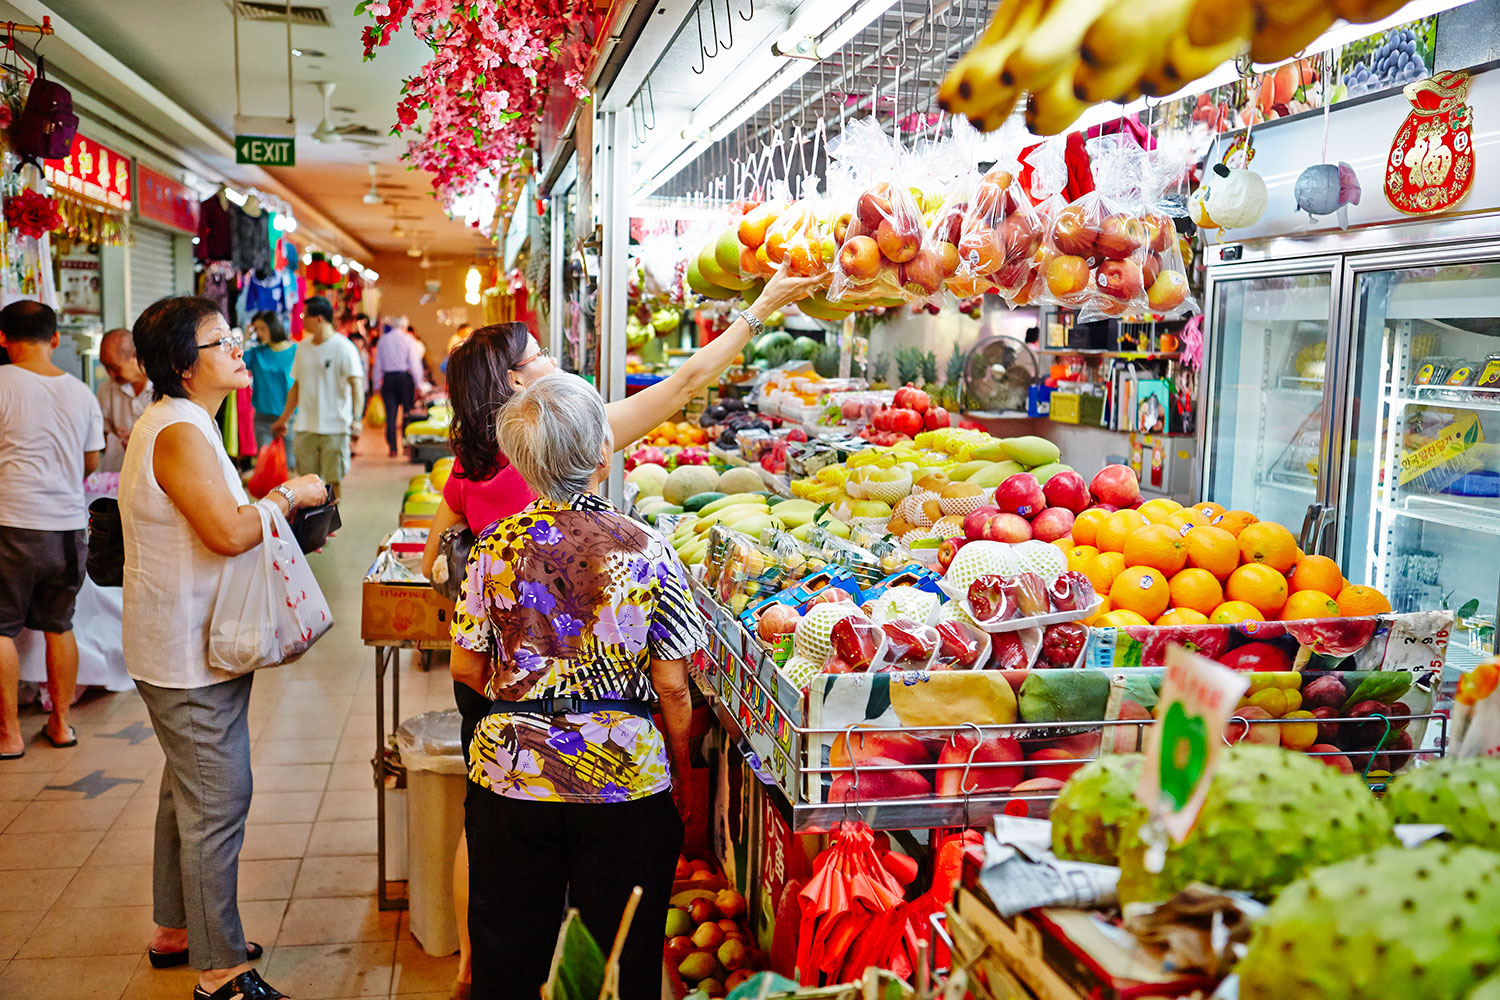 Tiong Bahru Market offers a fresh and vibrant selection of regional fruits. It is now open for trade having received the SG Clean Quality Mark.